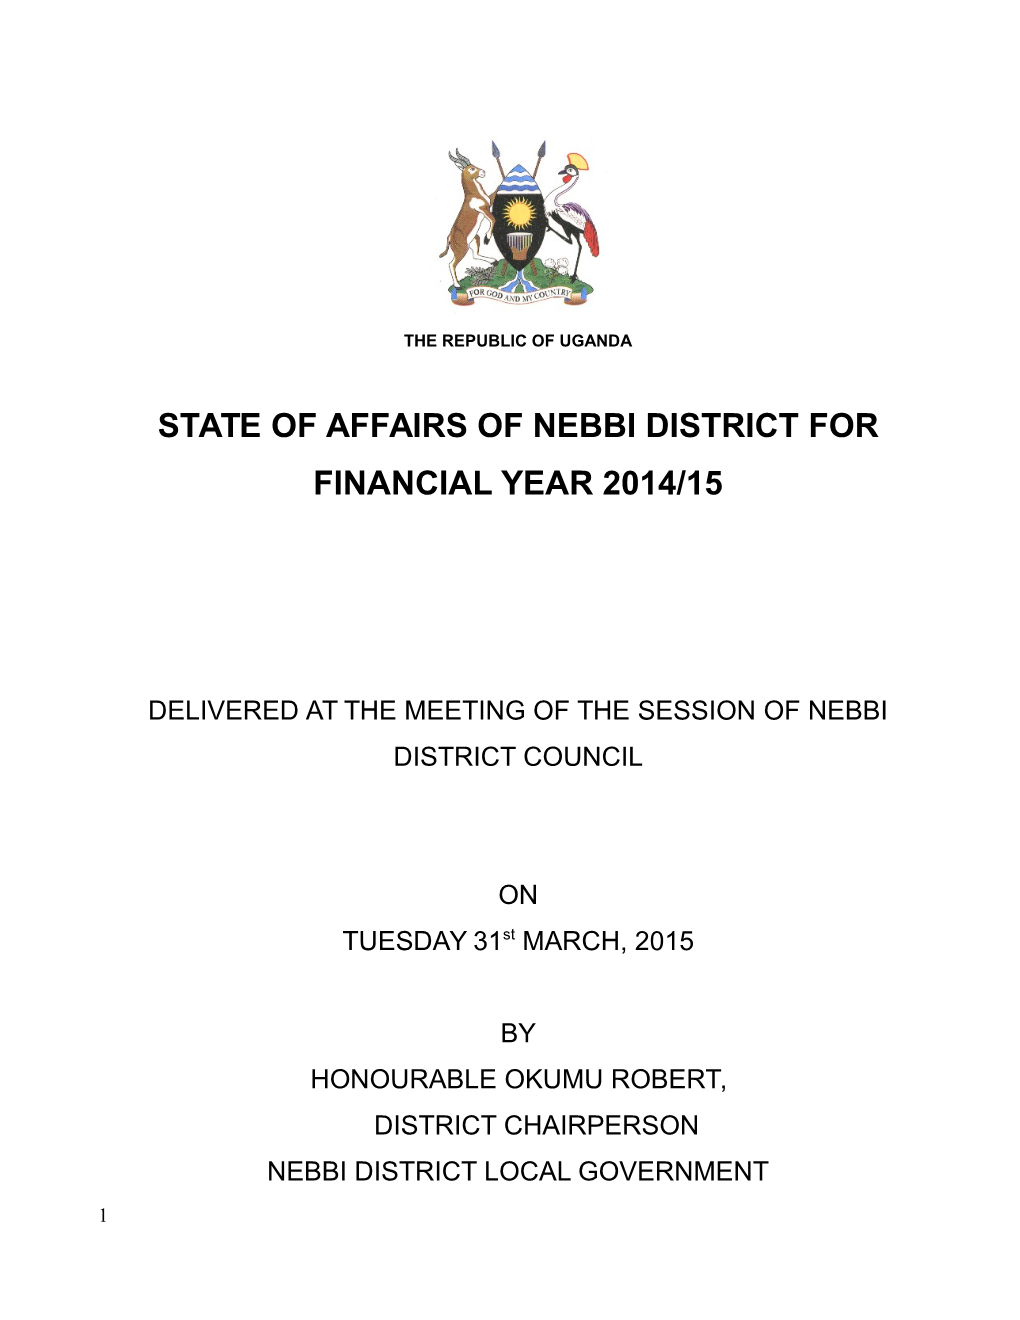 State of District Affairs 2014/15